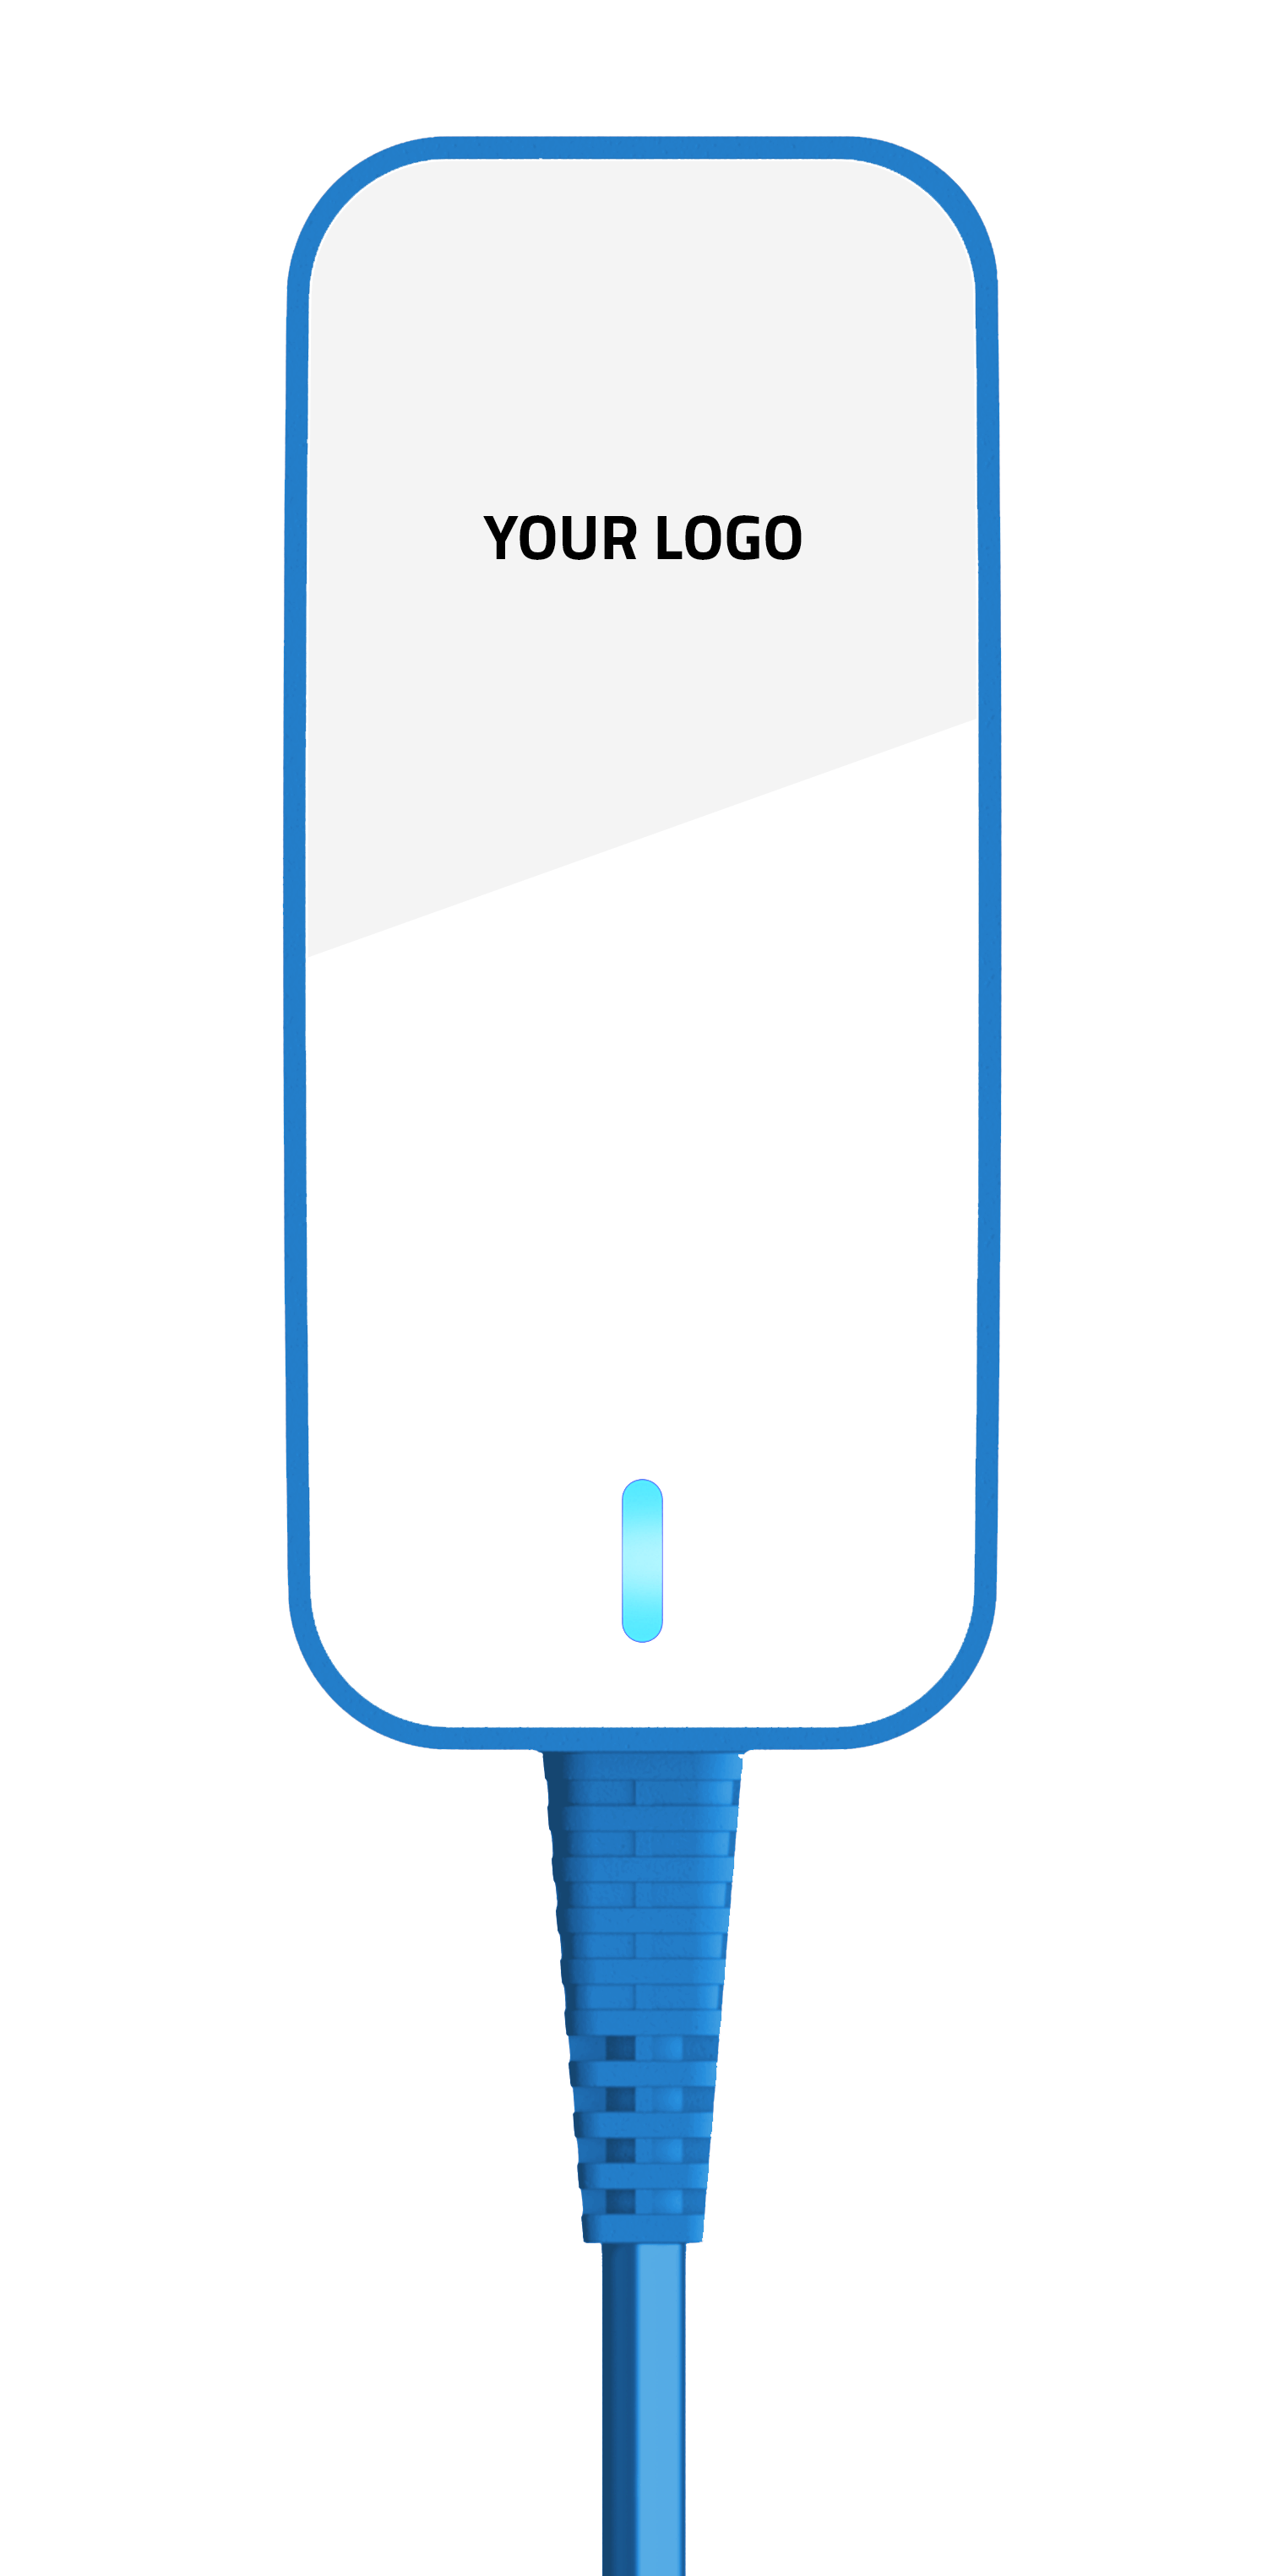 A white power supply charger with a blue light on it and blue trim.